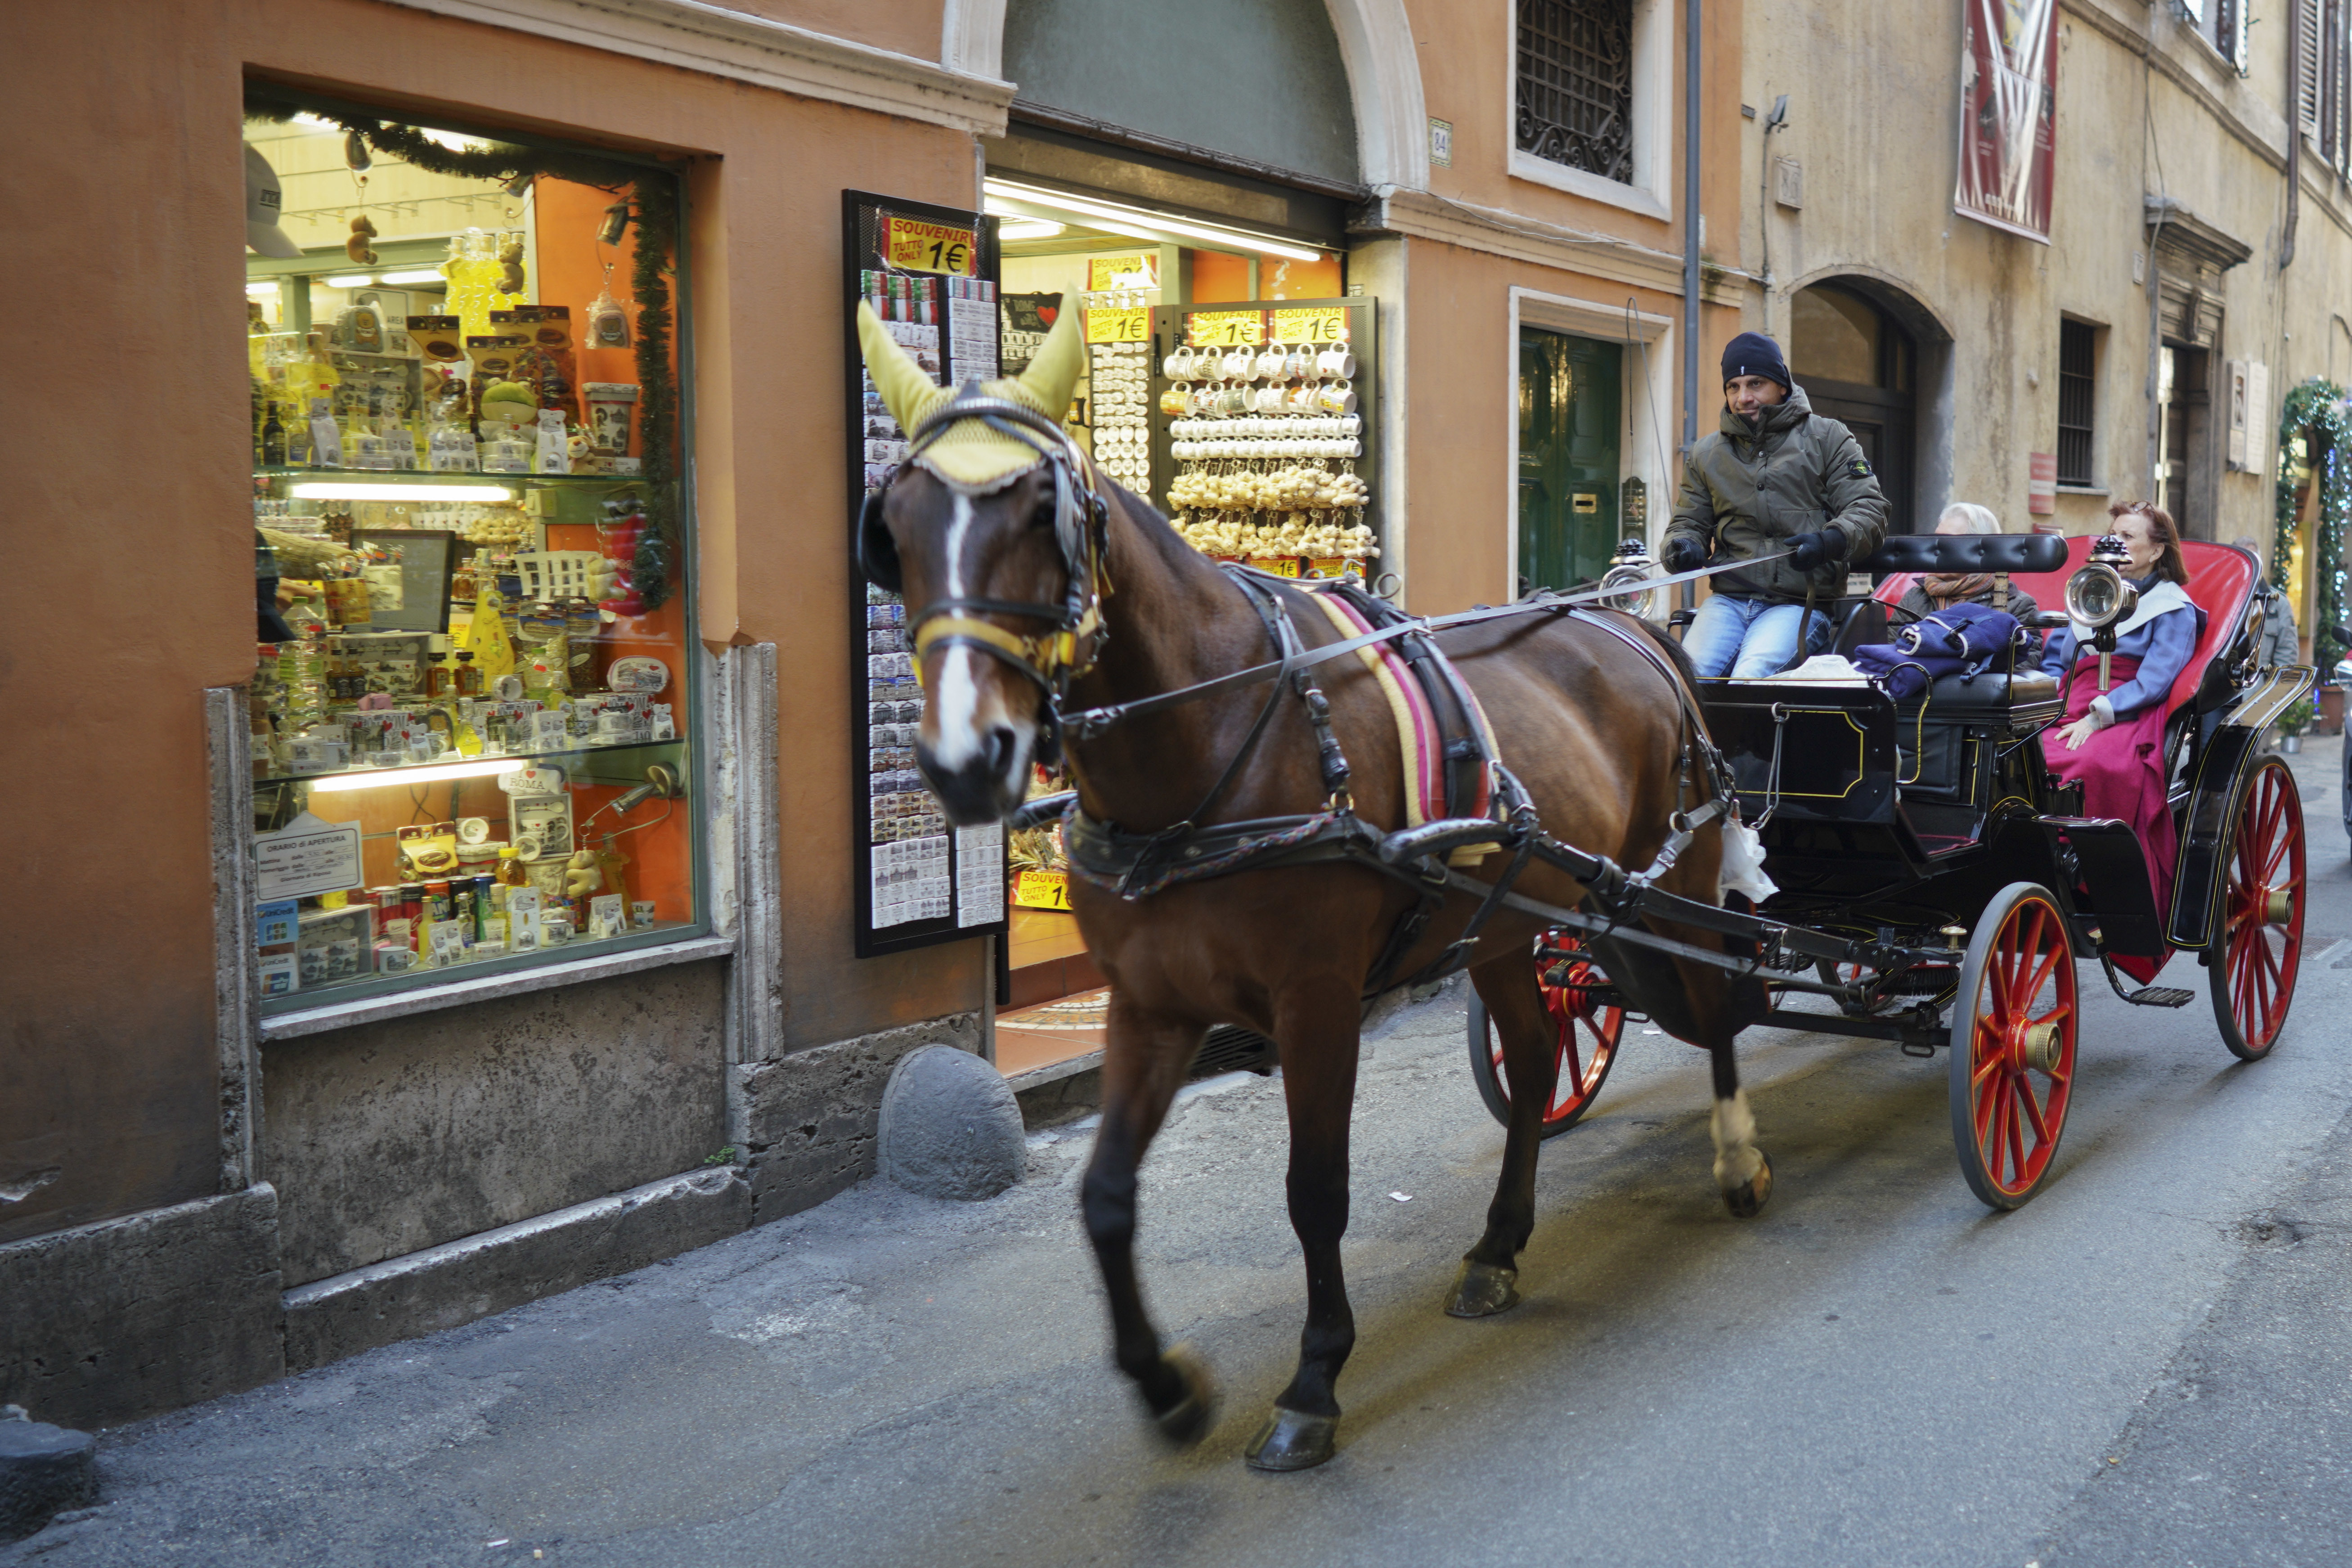 A horse pulls a botticella, a traditional Roman touristic horse-driven carriage, along an alley in downtown Rome, Monday, Jan. 7, 2019. (AP Photo/Andrew Medichini)